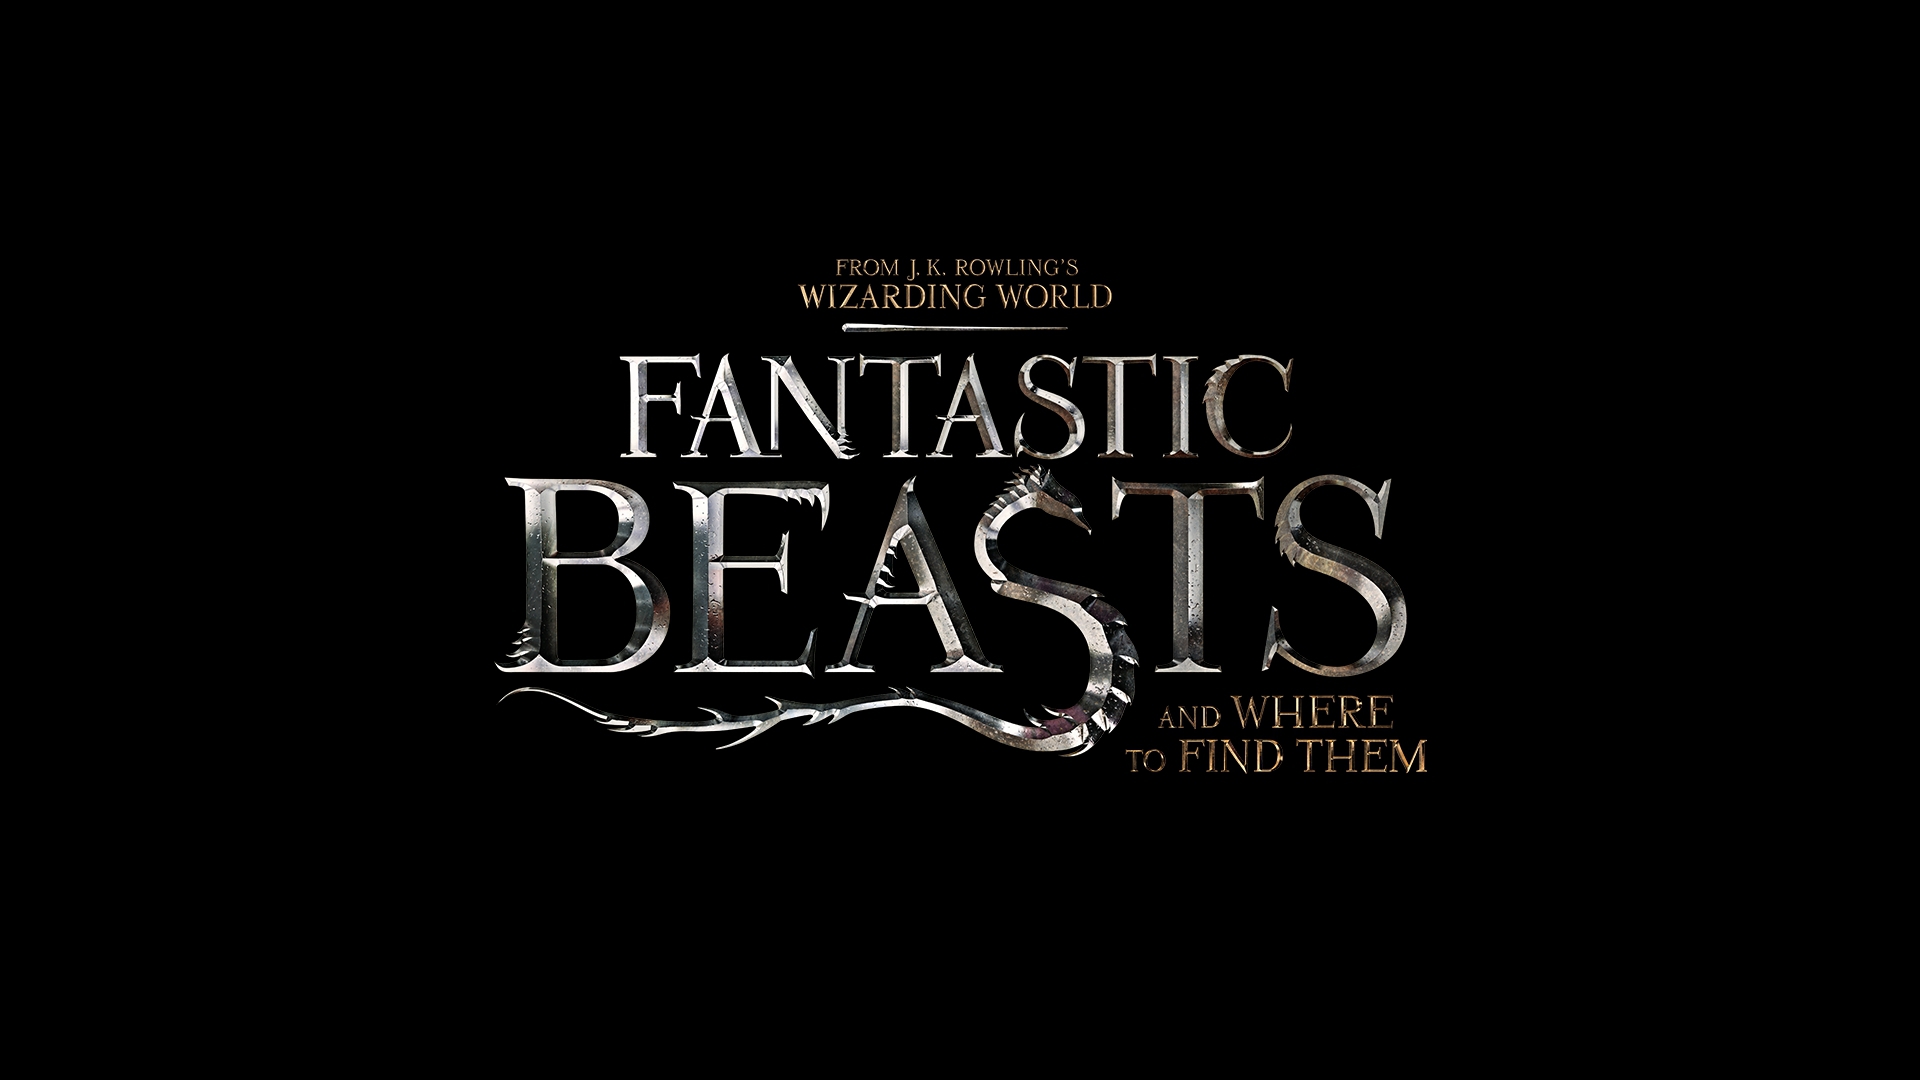 Full HD Watch Movie Online 2016 Fantastic Beasts And Where To Find Them